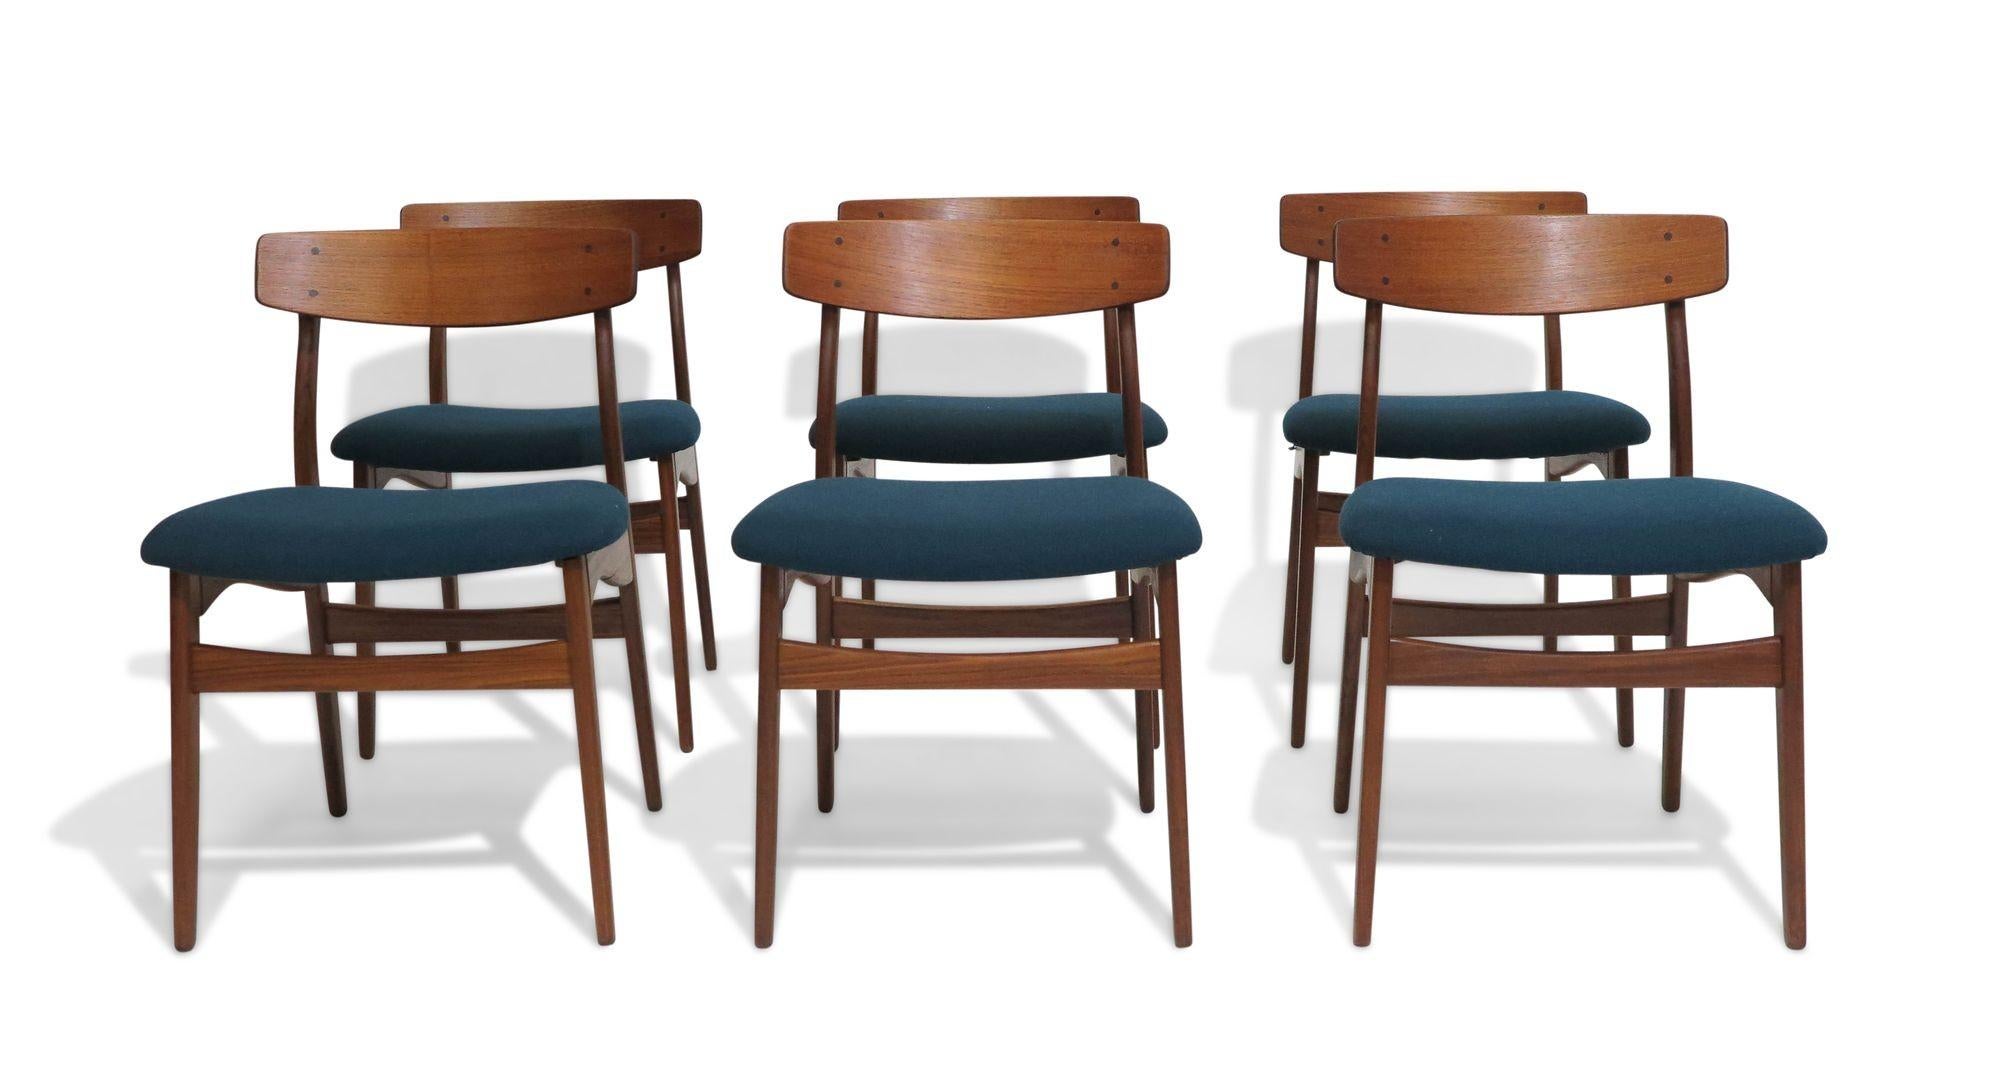 Six mid-century Danish teak dining chairs handcrafted in Denmark of solid old-growth teak with sculpted back rest with exposed dowel joinery and newly upholstered seats in teal/blue wool textile. The wood has been professionally restored by our team